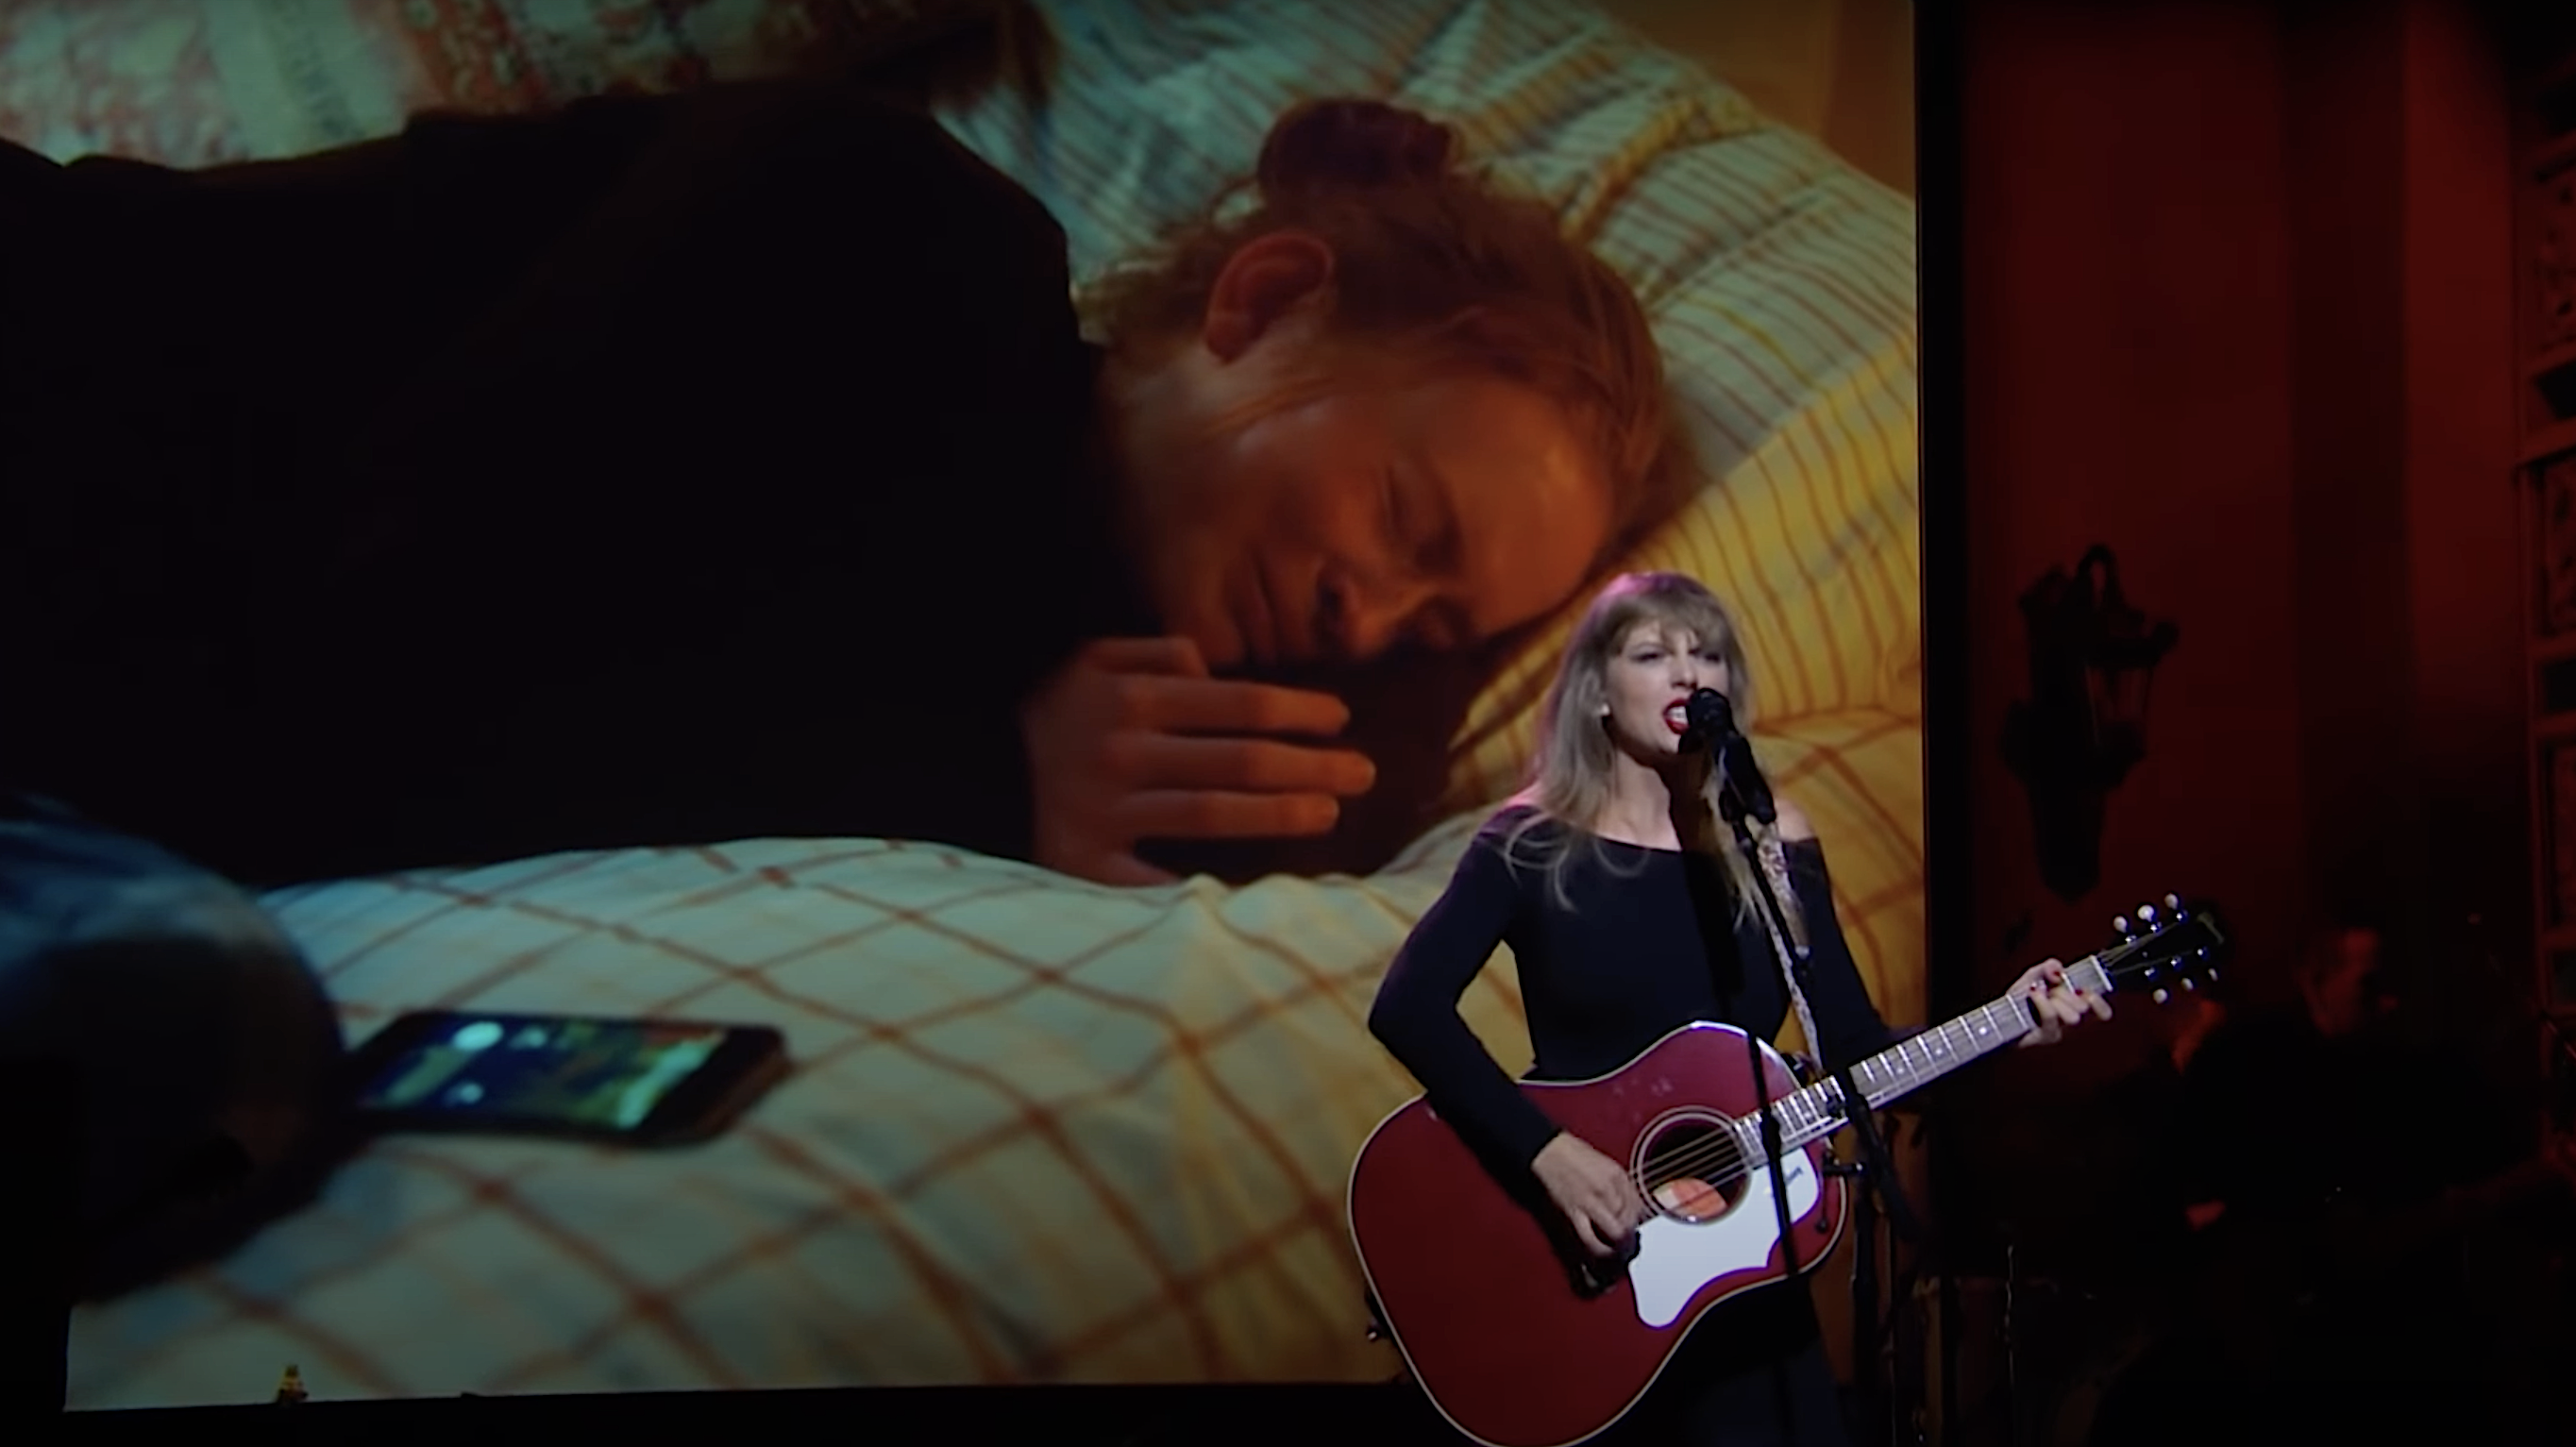 Taylor Swift busts out a ten-minute multimedia musical showstopper on Saturday Night Live